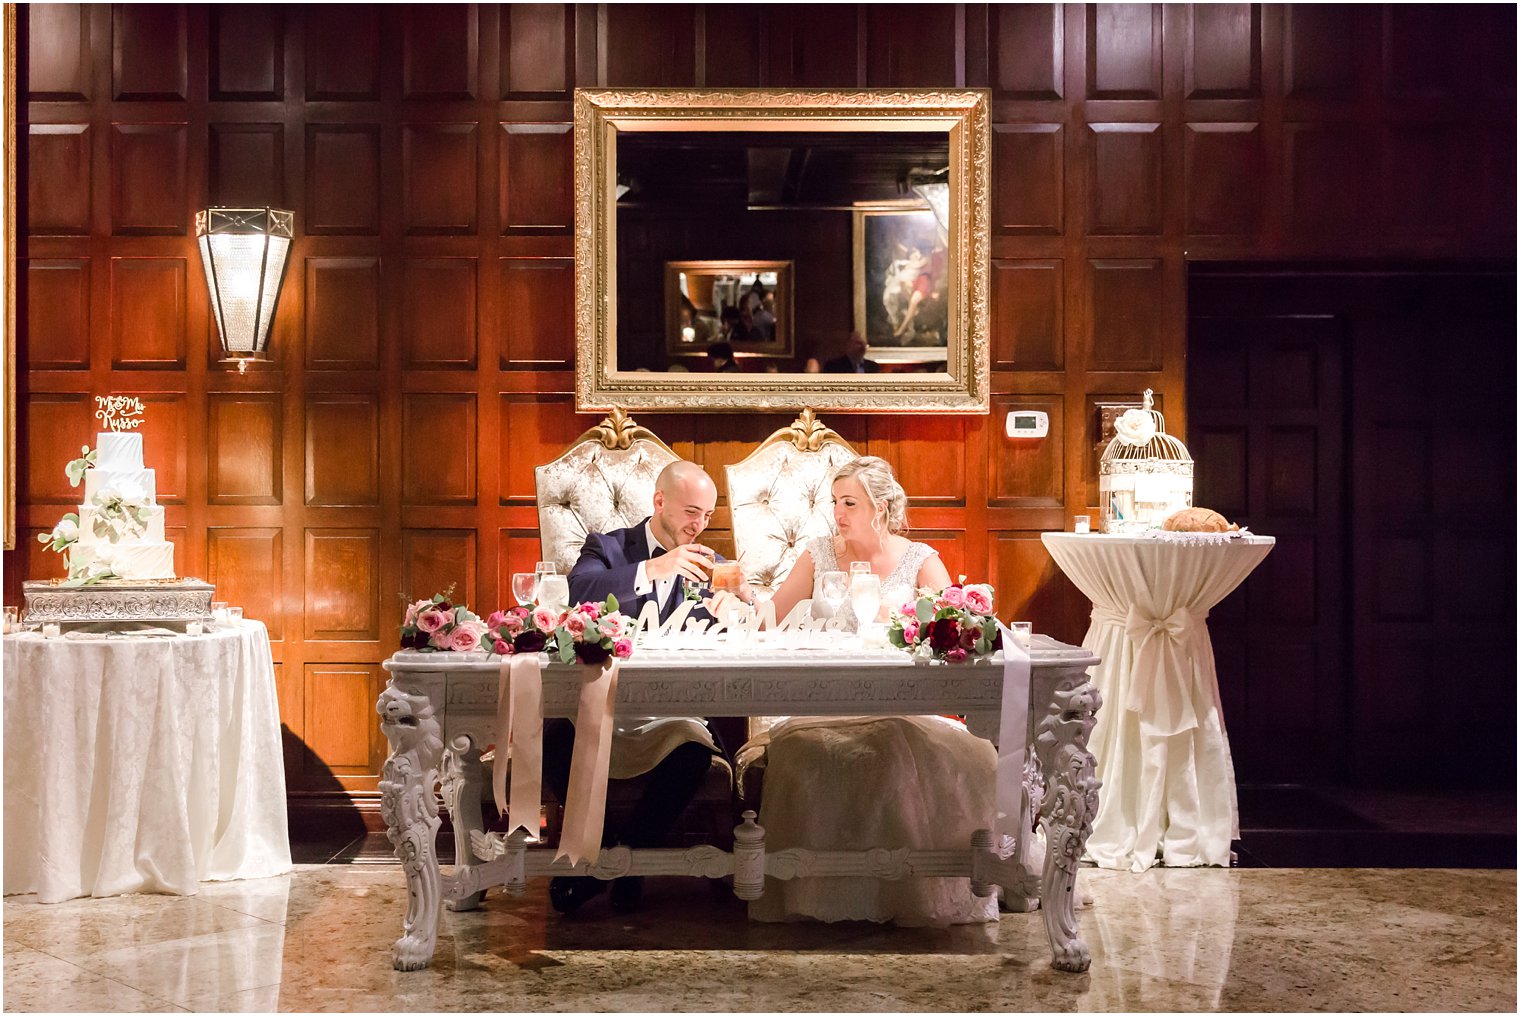 Bride and groom at Sweetheart table in Shadowbrook wedding photos